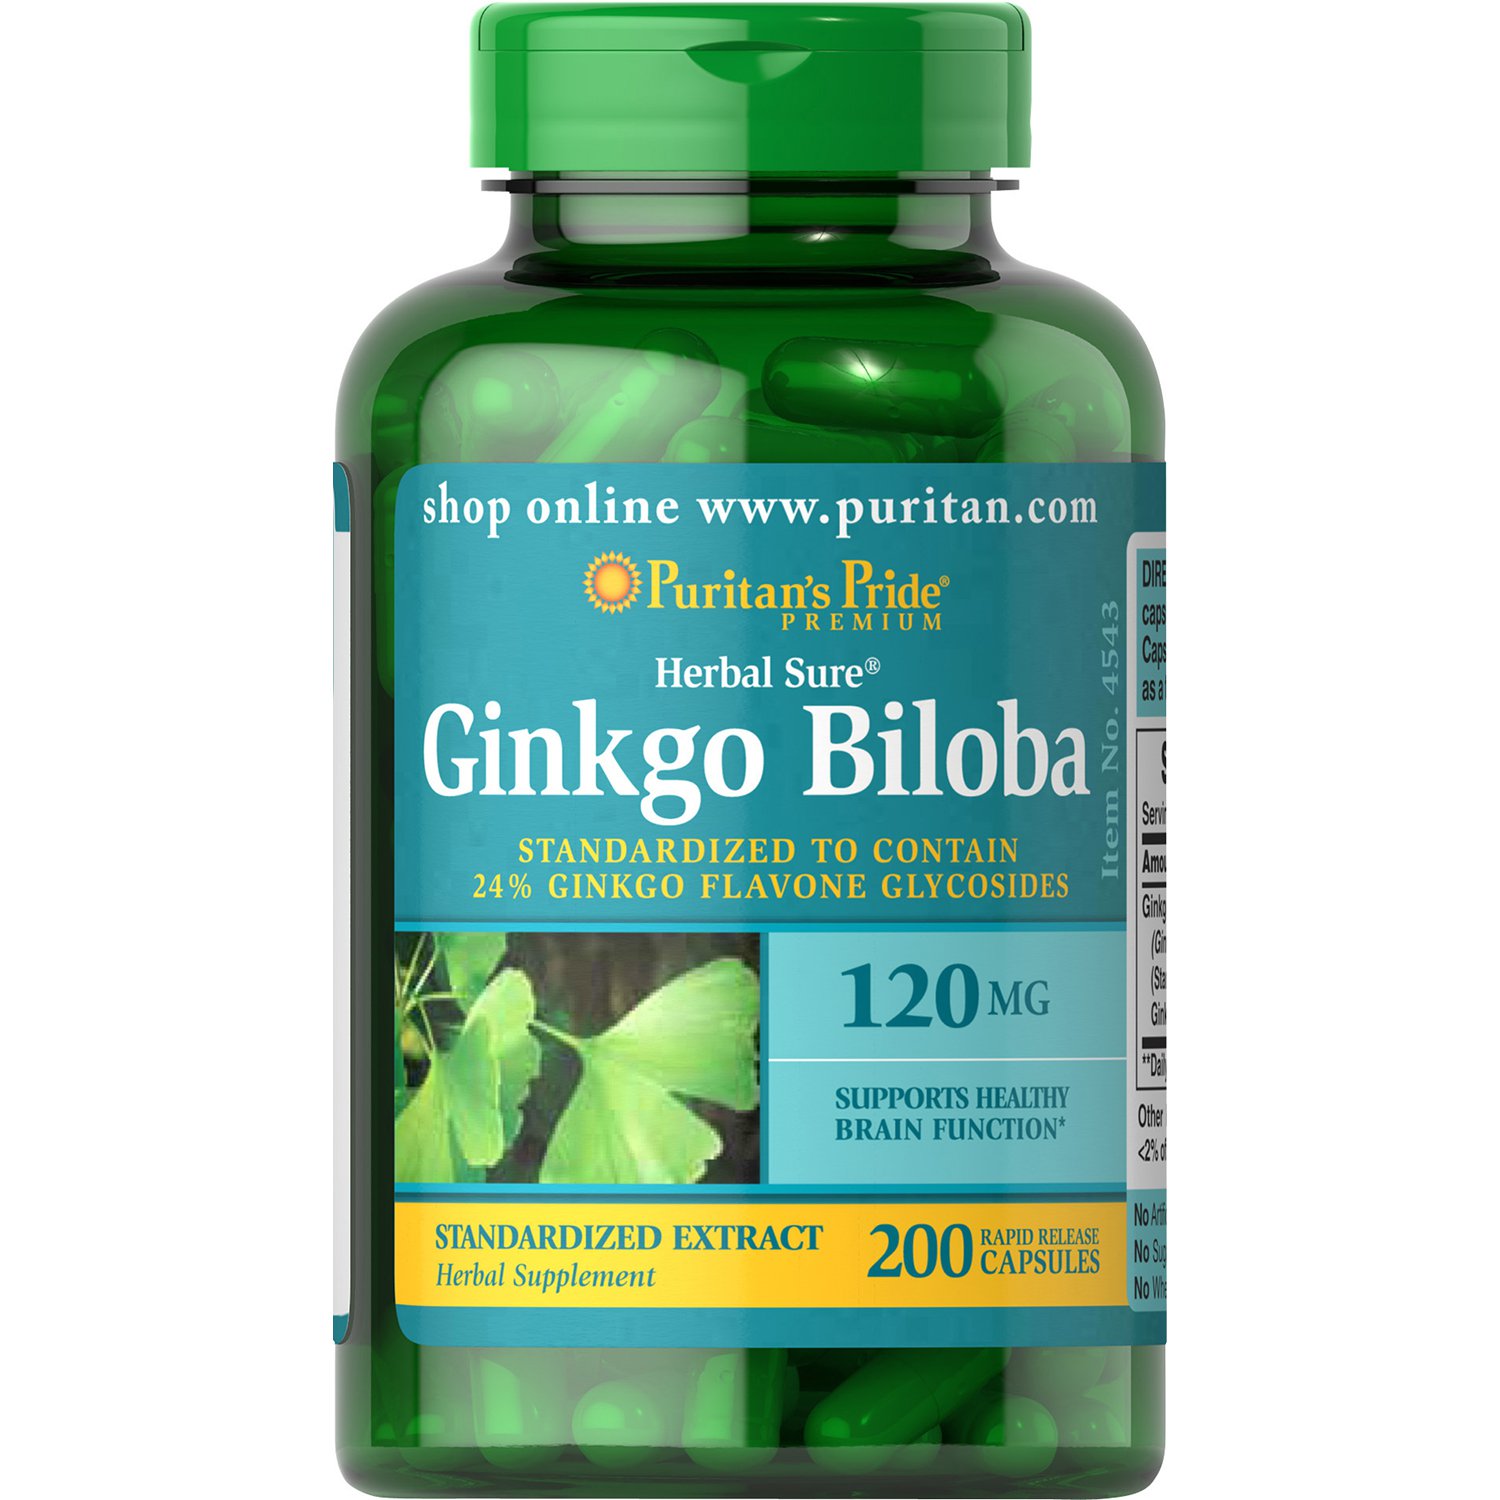 Puritans Pride Ginkgo Biloba Standardized Extract 120 mg 200 Tablets